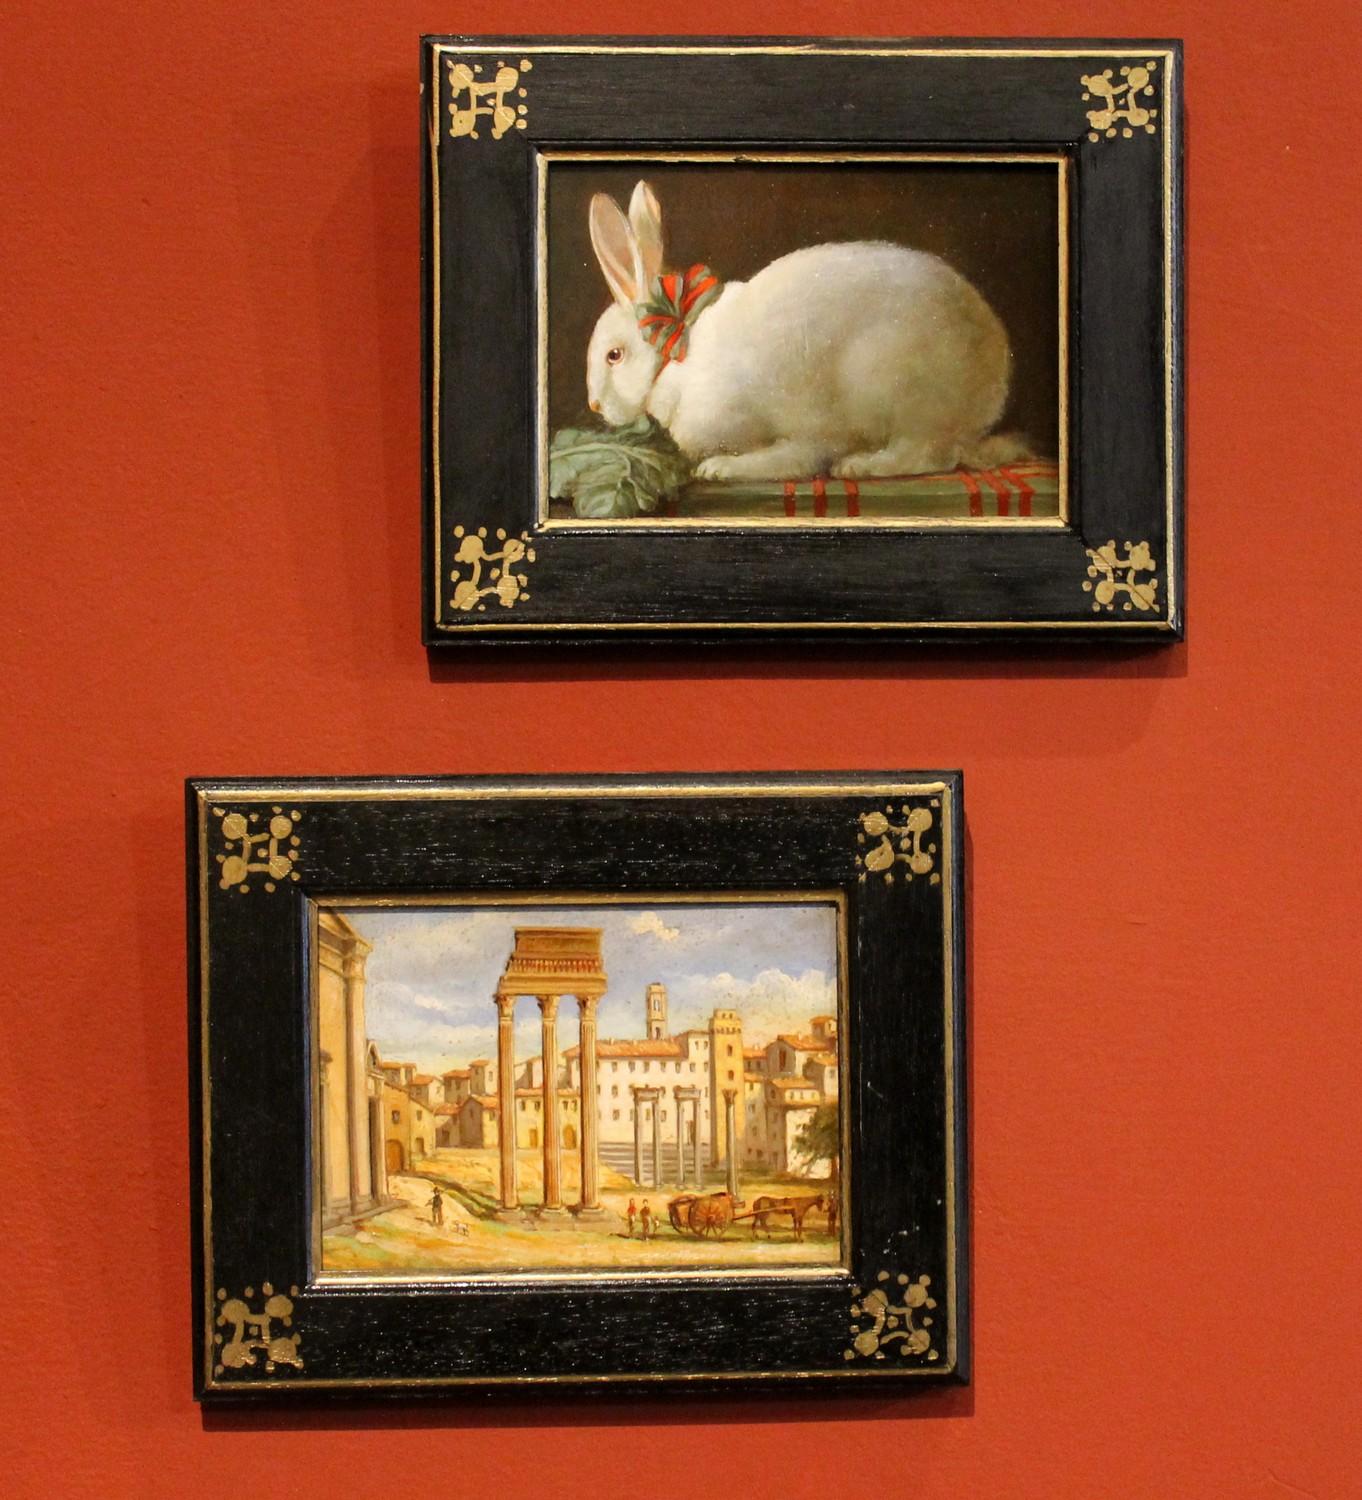 Hand-Painted Italian Late 19th Century Oil on Board Still Life Painting with a Bunny